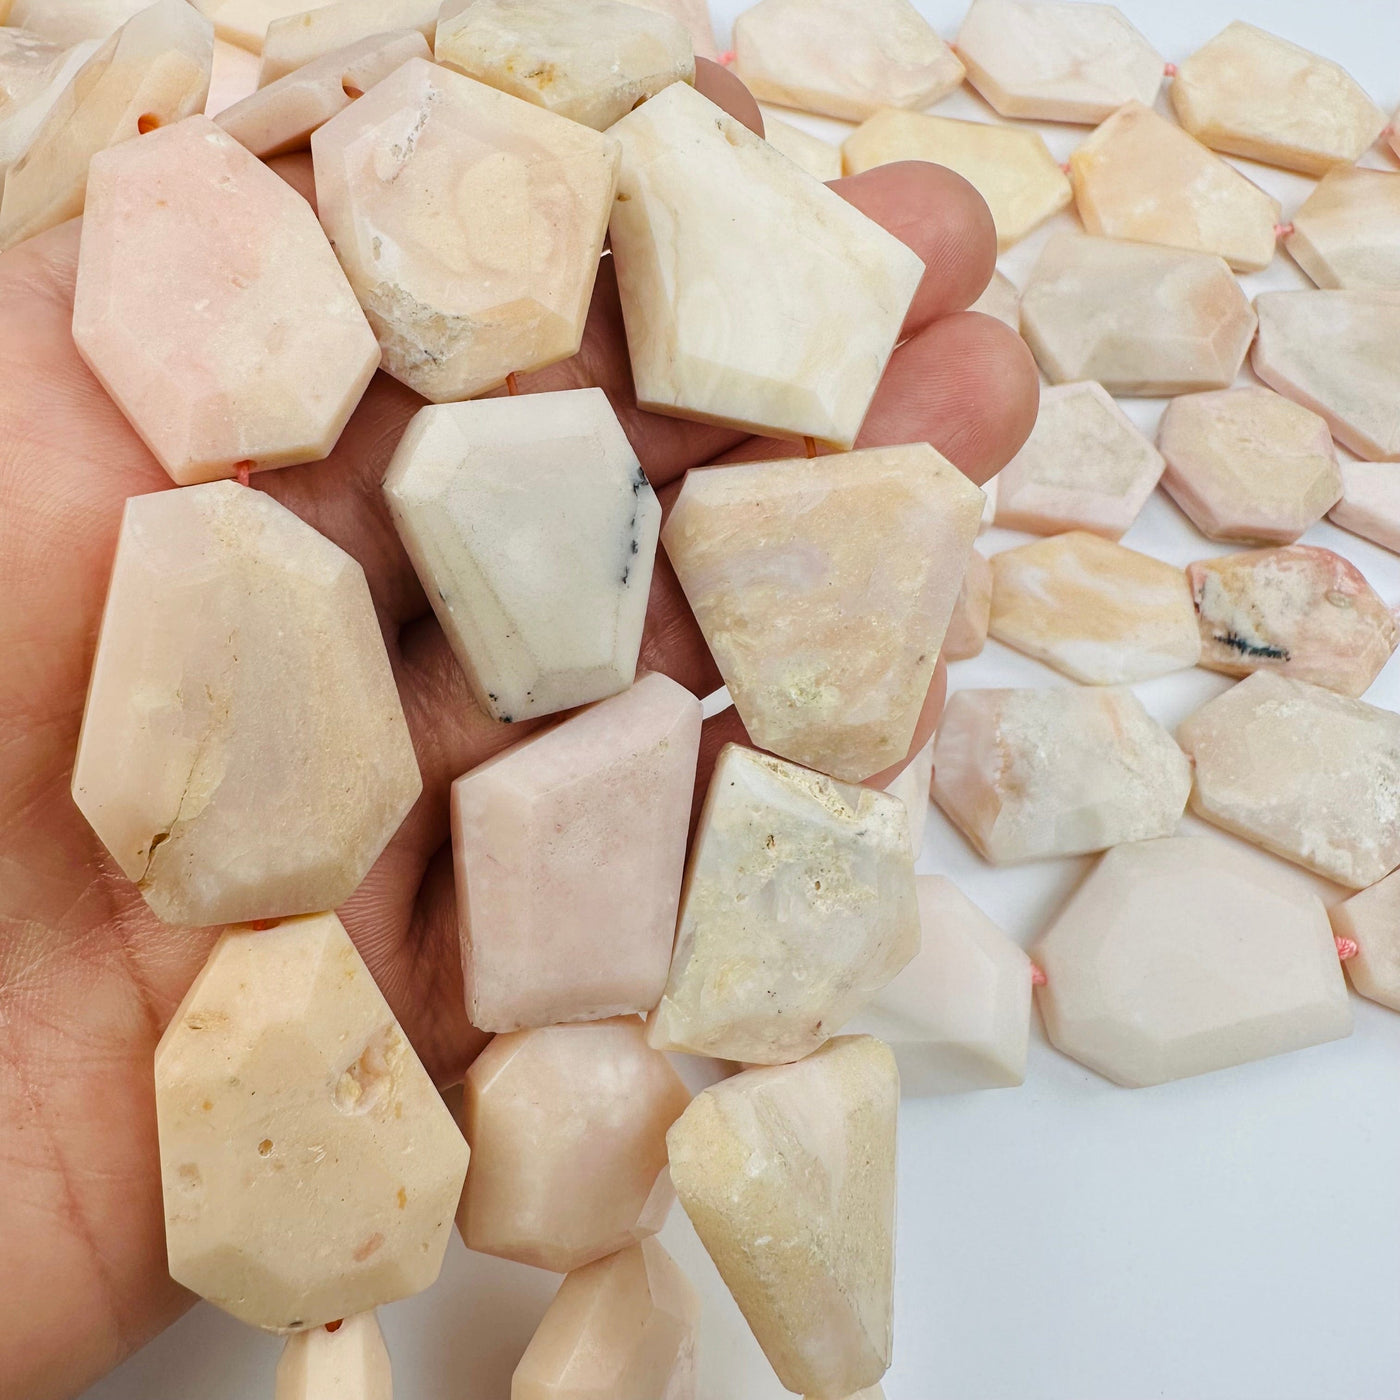 Pink Opal Crystal Beads - 1 Full Strand in hand for size reference 